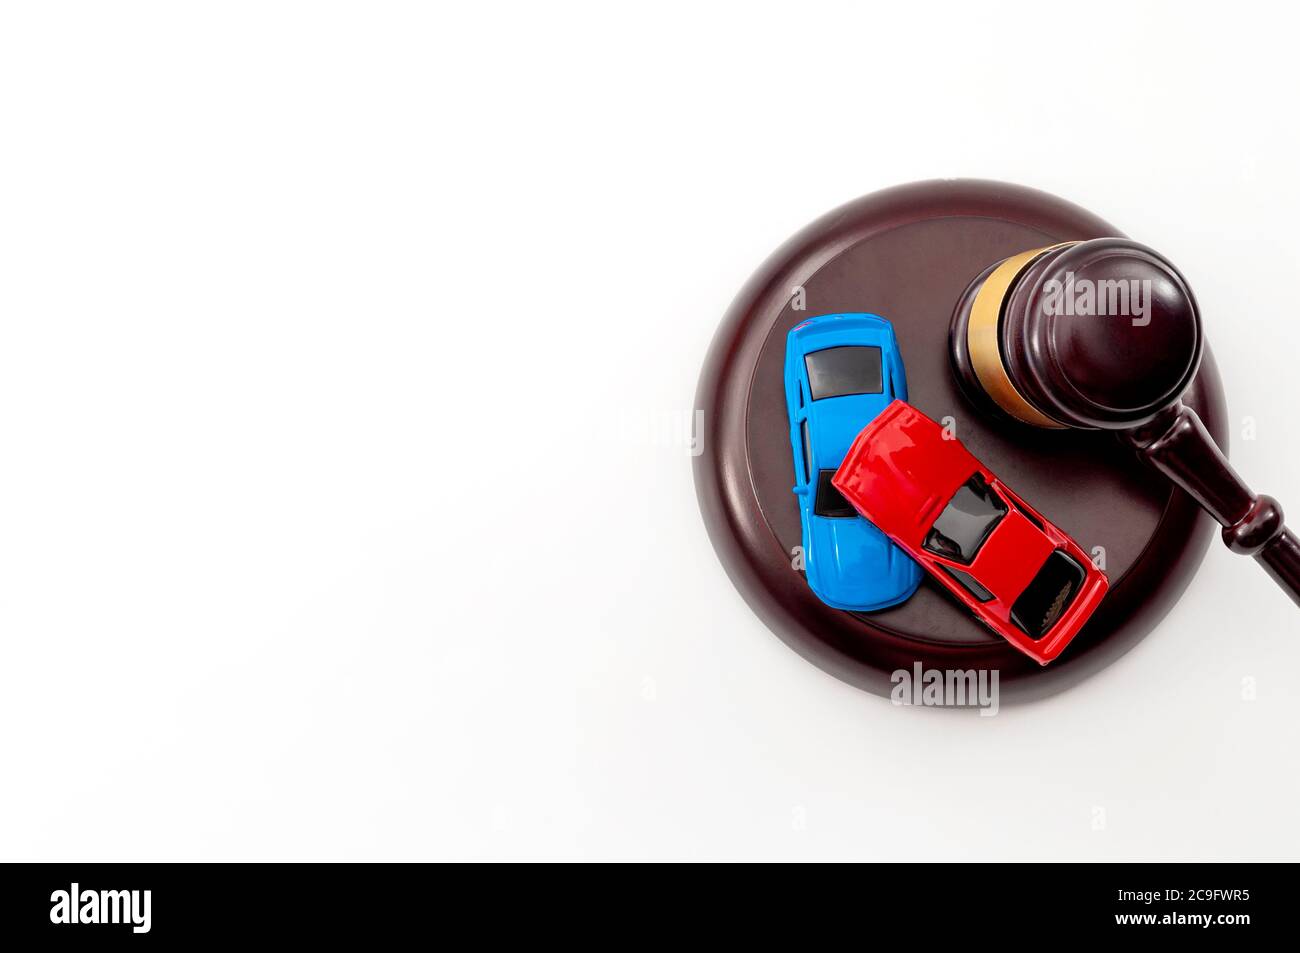 Insurance claim following a car accident settled in court and automobile safety legislation conceptual idea with judge gavel and model cars colliding Stock Photo